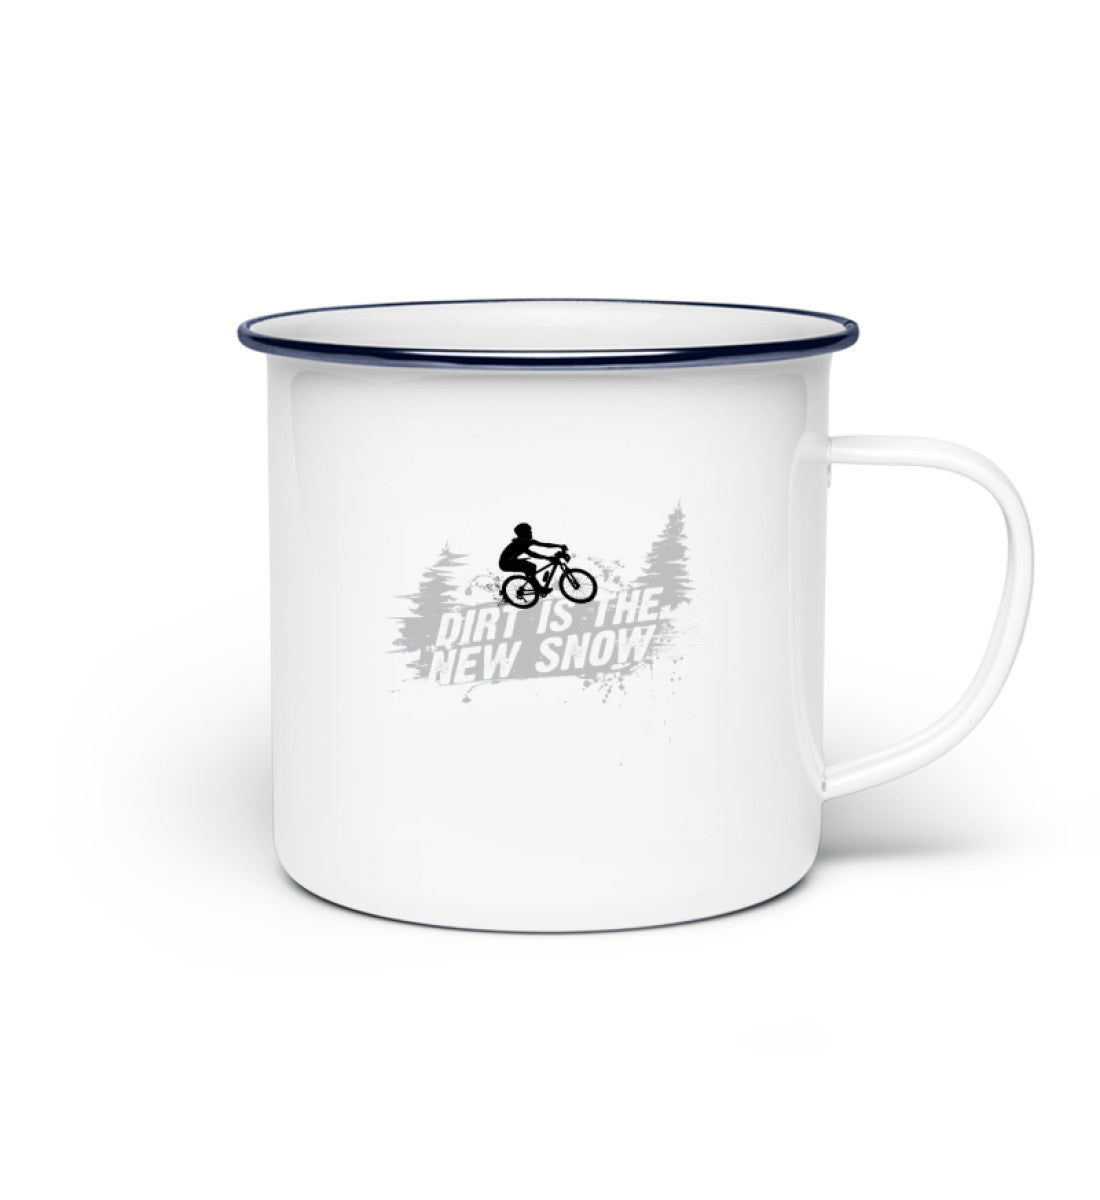 Dirt is the new Snow - Emaille Tasse mountainbike